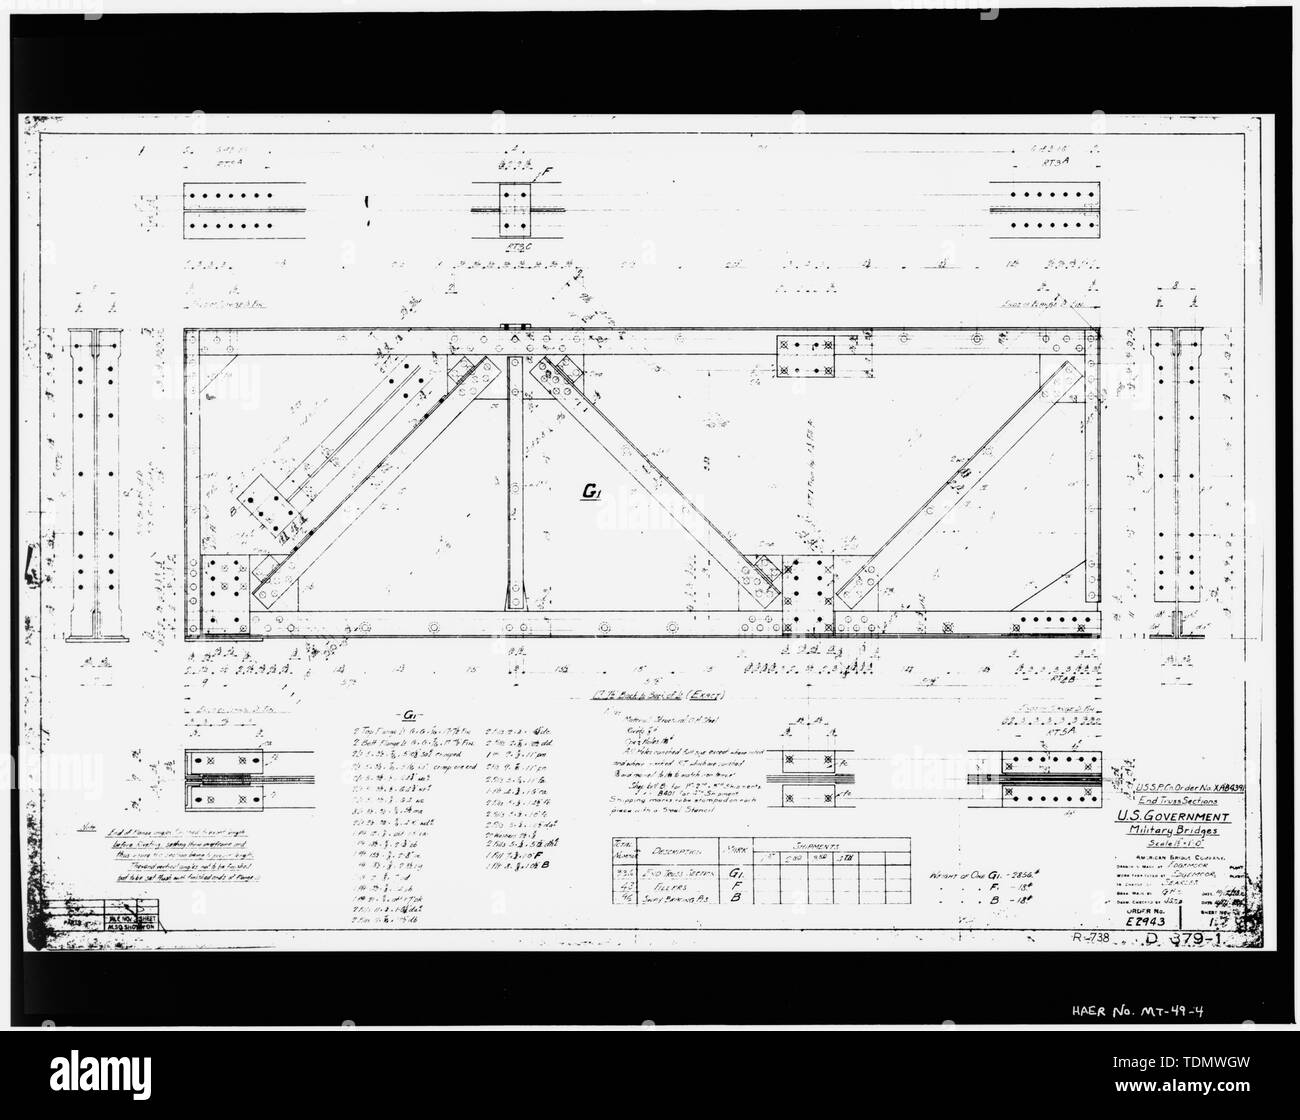 PHOTOGRAPHIC COPY OF SHEET NO. 1 OF 1918 BRIDGE PLANS FROM THE LINENS IN POSSESSION OF NORTHERN REGION, U. S. FOREST SERVICE, MISSOULA, MONTANA. END TRUSS SECTIONS. - Fish Creek Bridge, Cyr-Iron Mountain Road, Alberton, Mineral County, MT Stock Photo